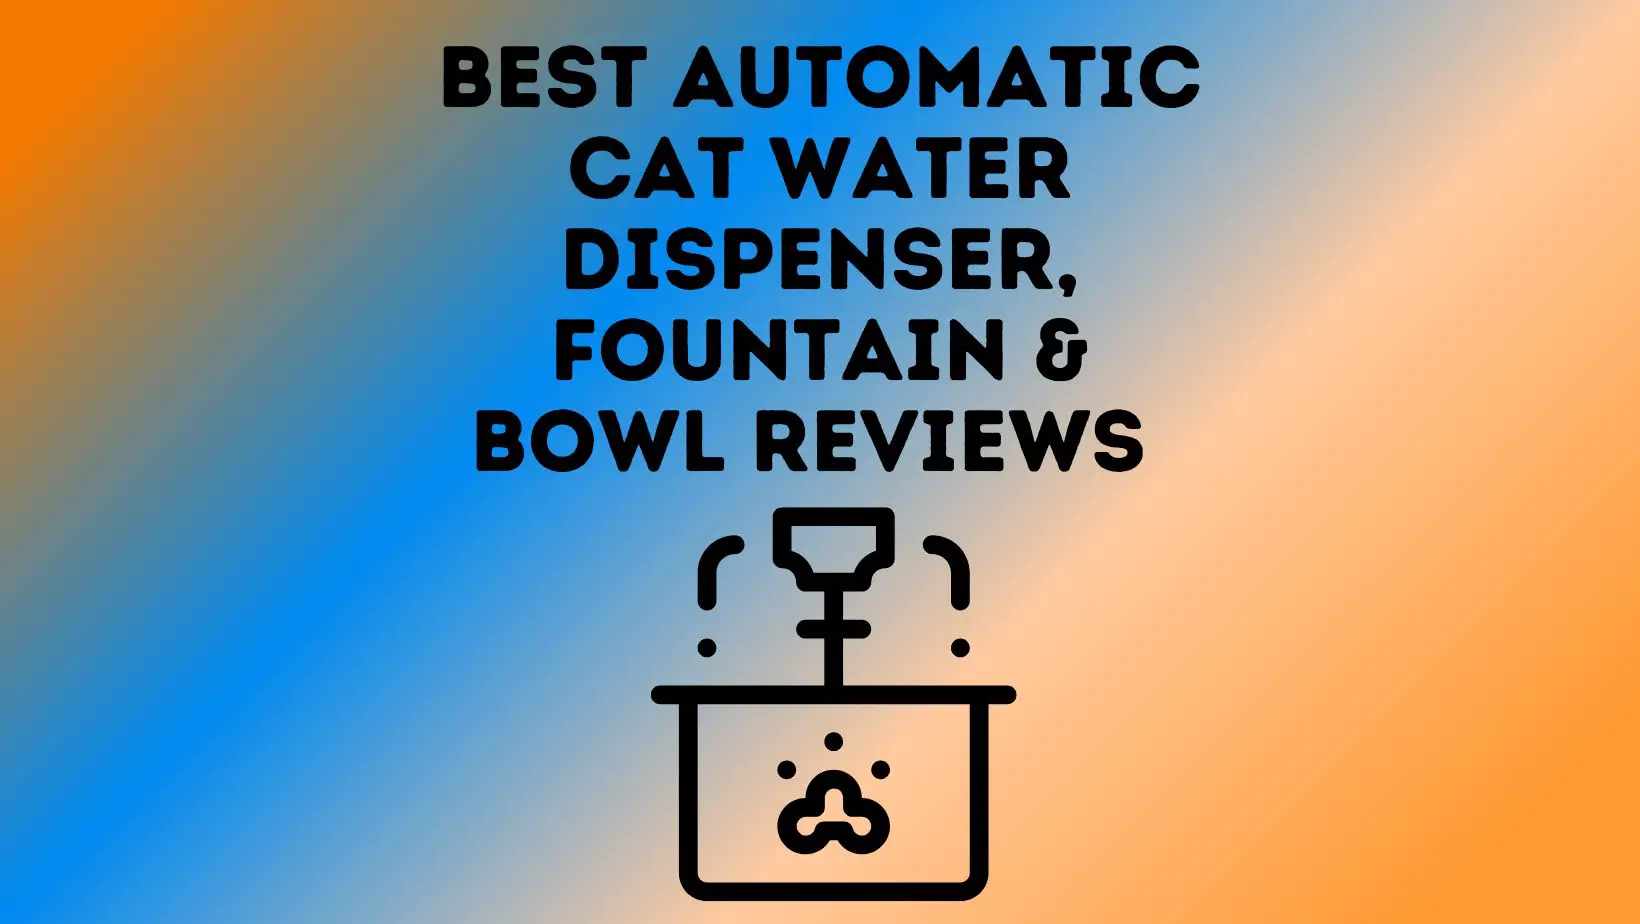 Best Automatic Cat Water Dispenser, Fountain & Bowl Reviews